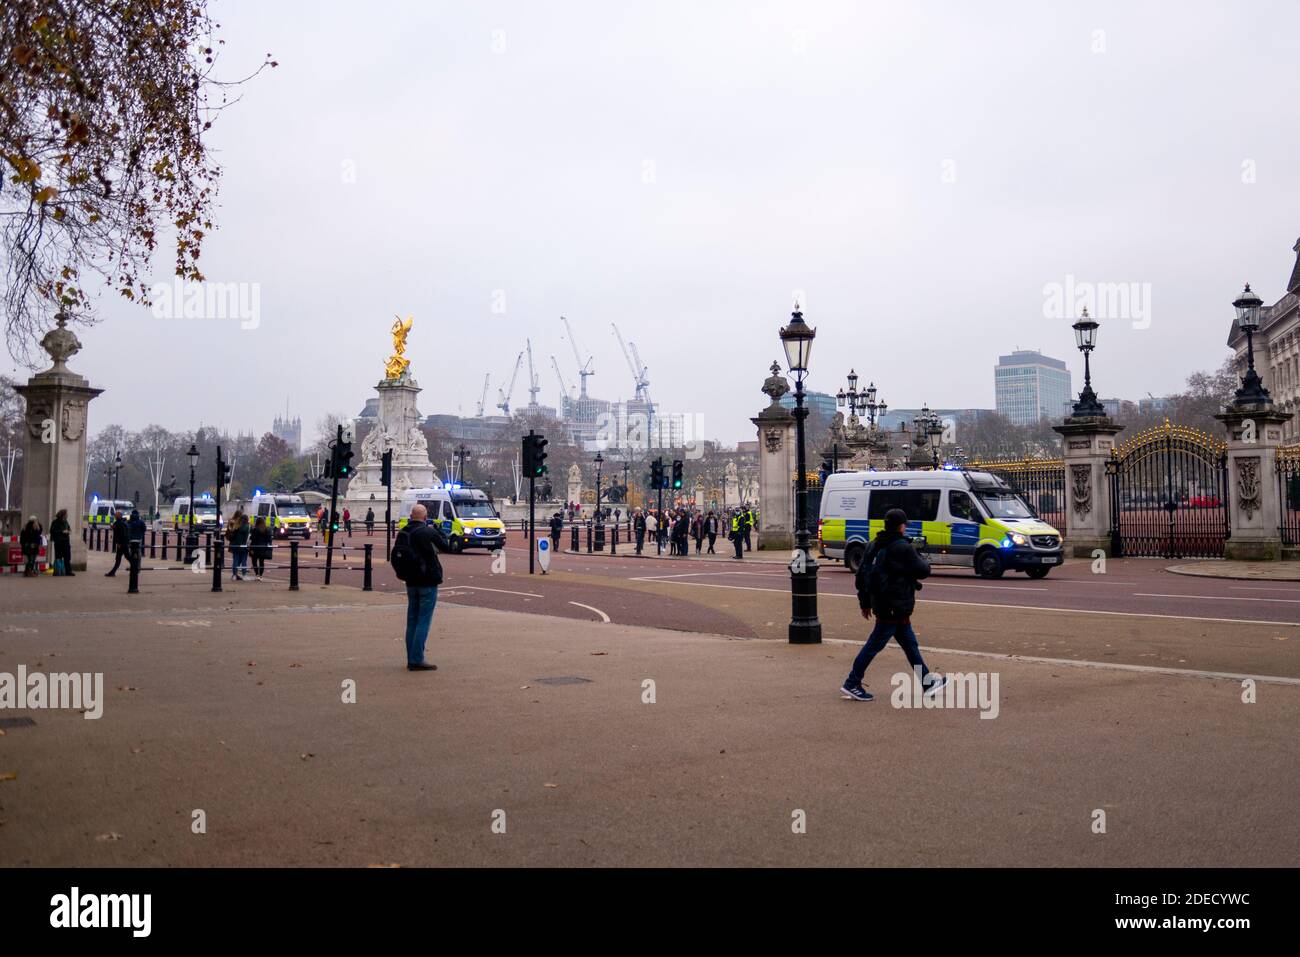 Police vans rushing to react to protesters at an anti lockdown protest in London, UK, passing the Victoria Memorial and Buckingham Palace Stock Photo